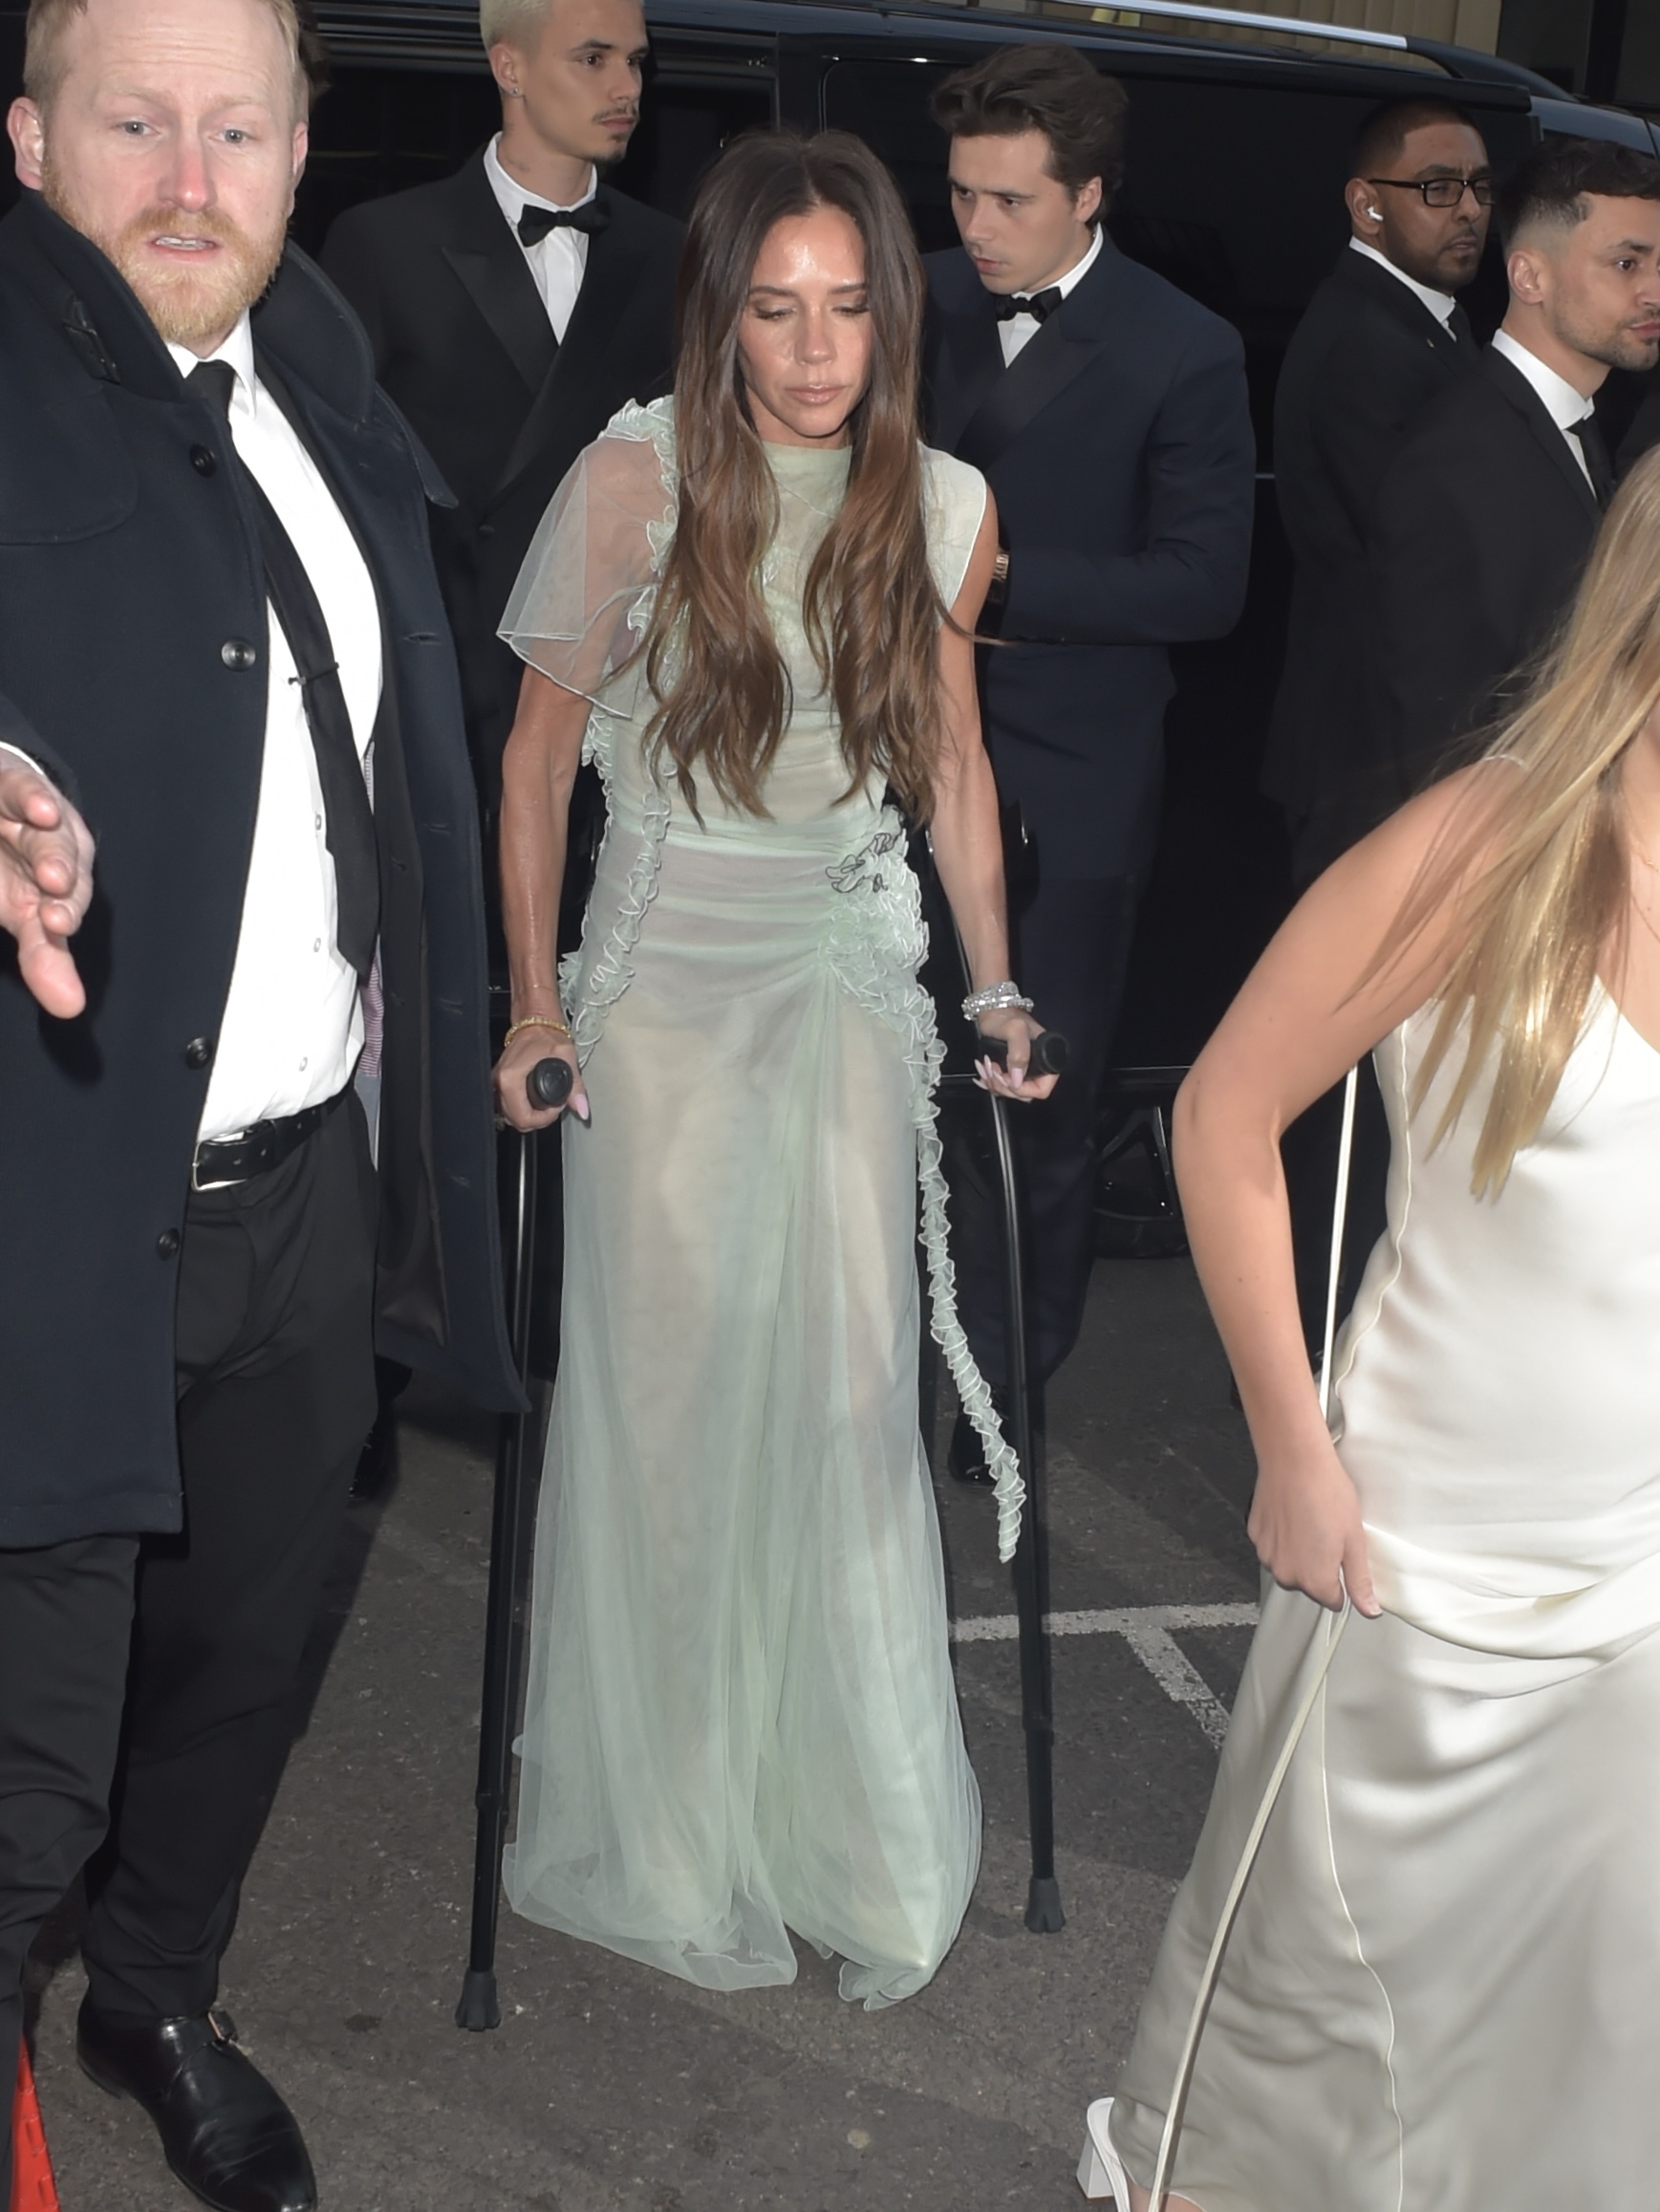 Victoria arrived at the expensive do on crutches after recently breaking her foot